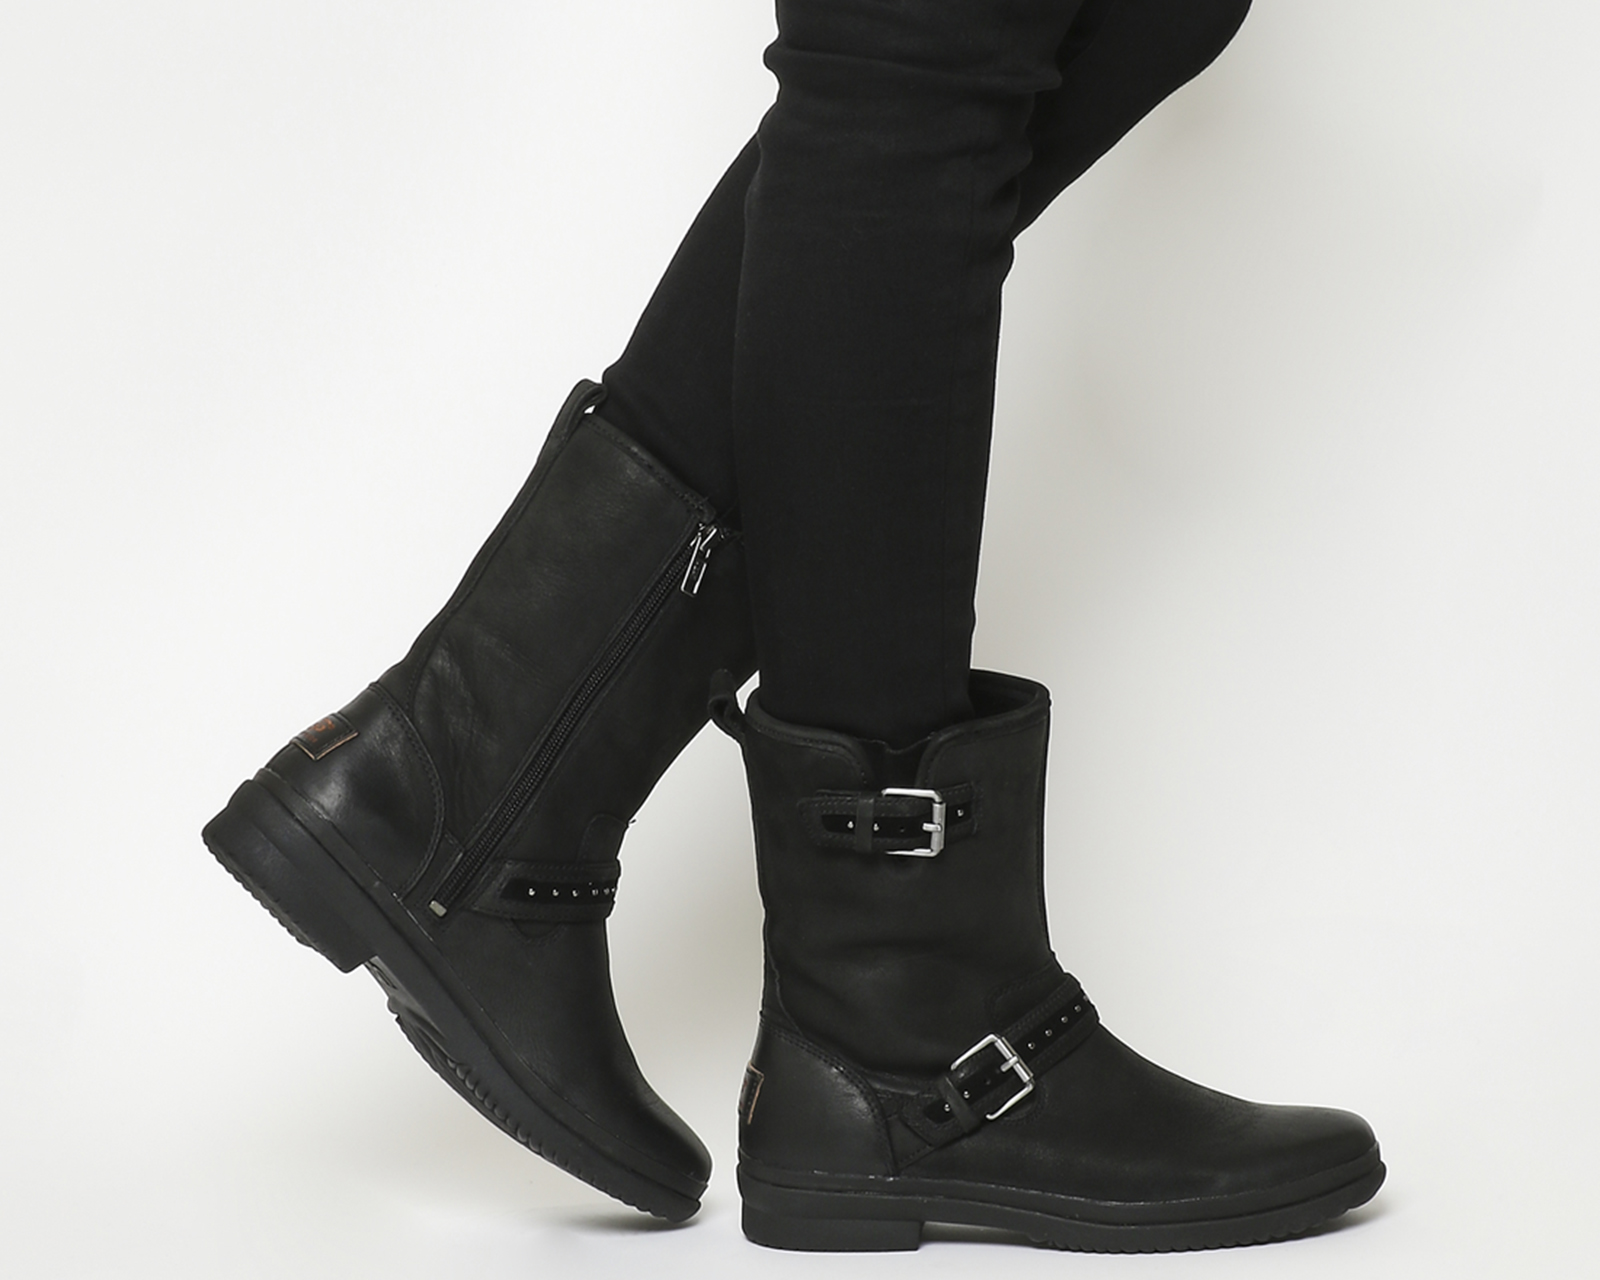 UGG Jenise Boots Black Leather - Women's Ankle Boots